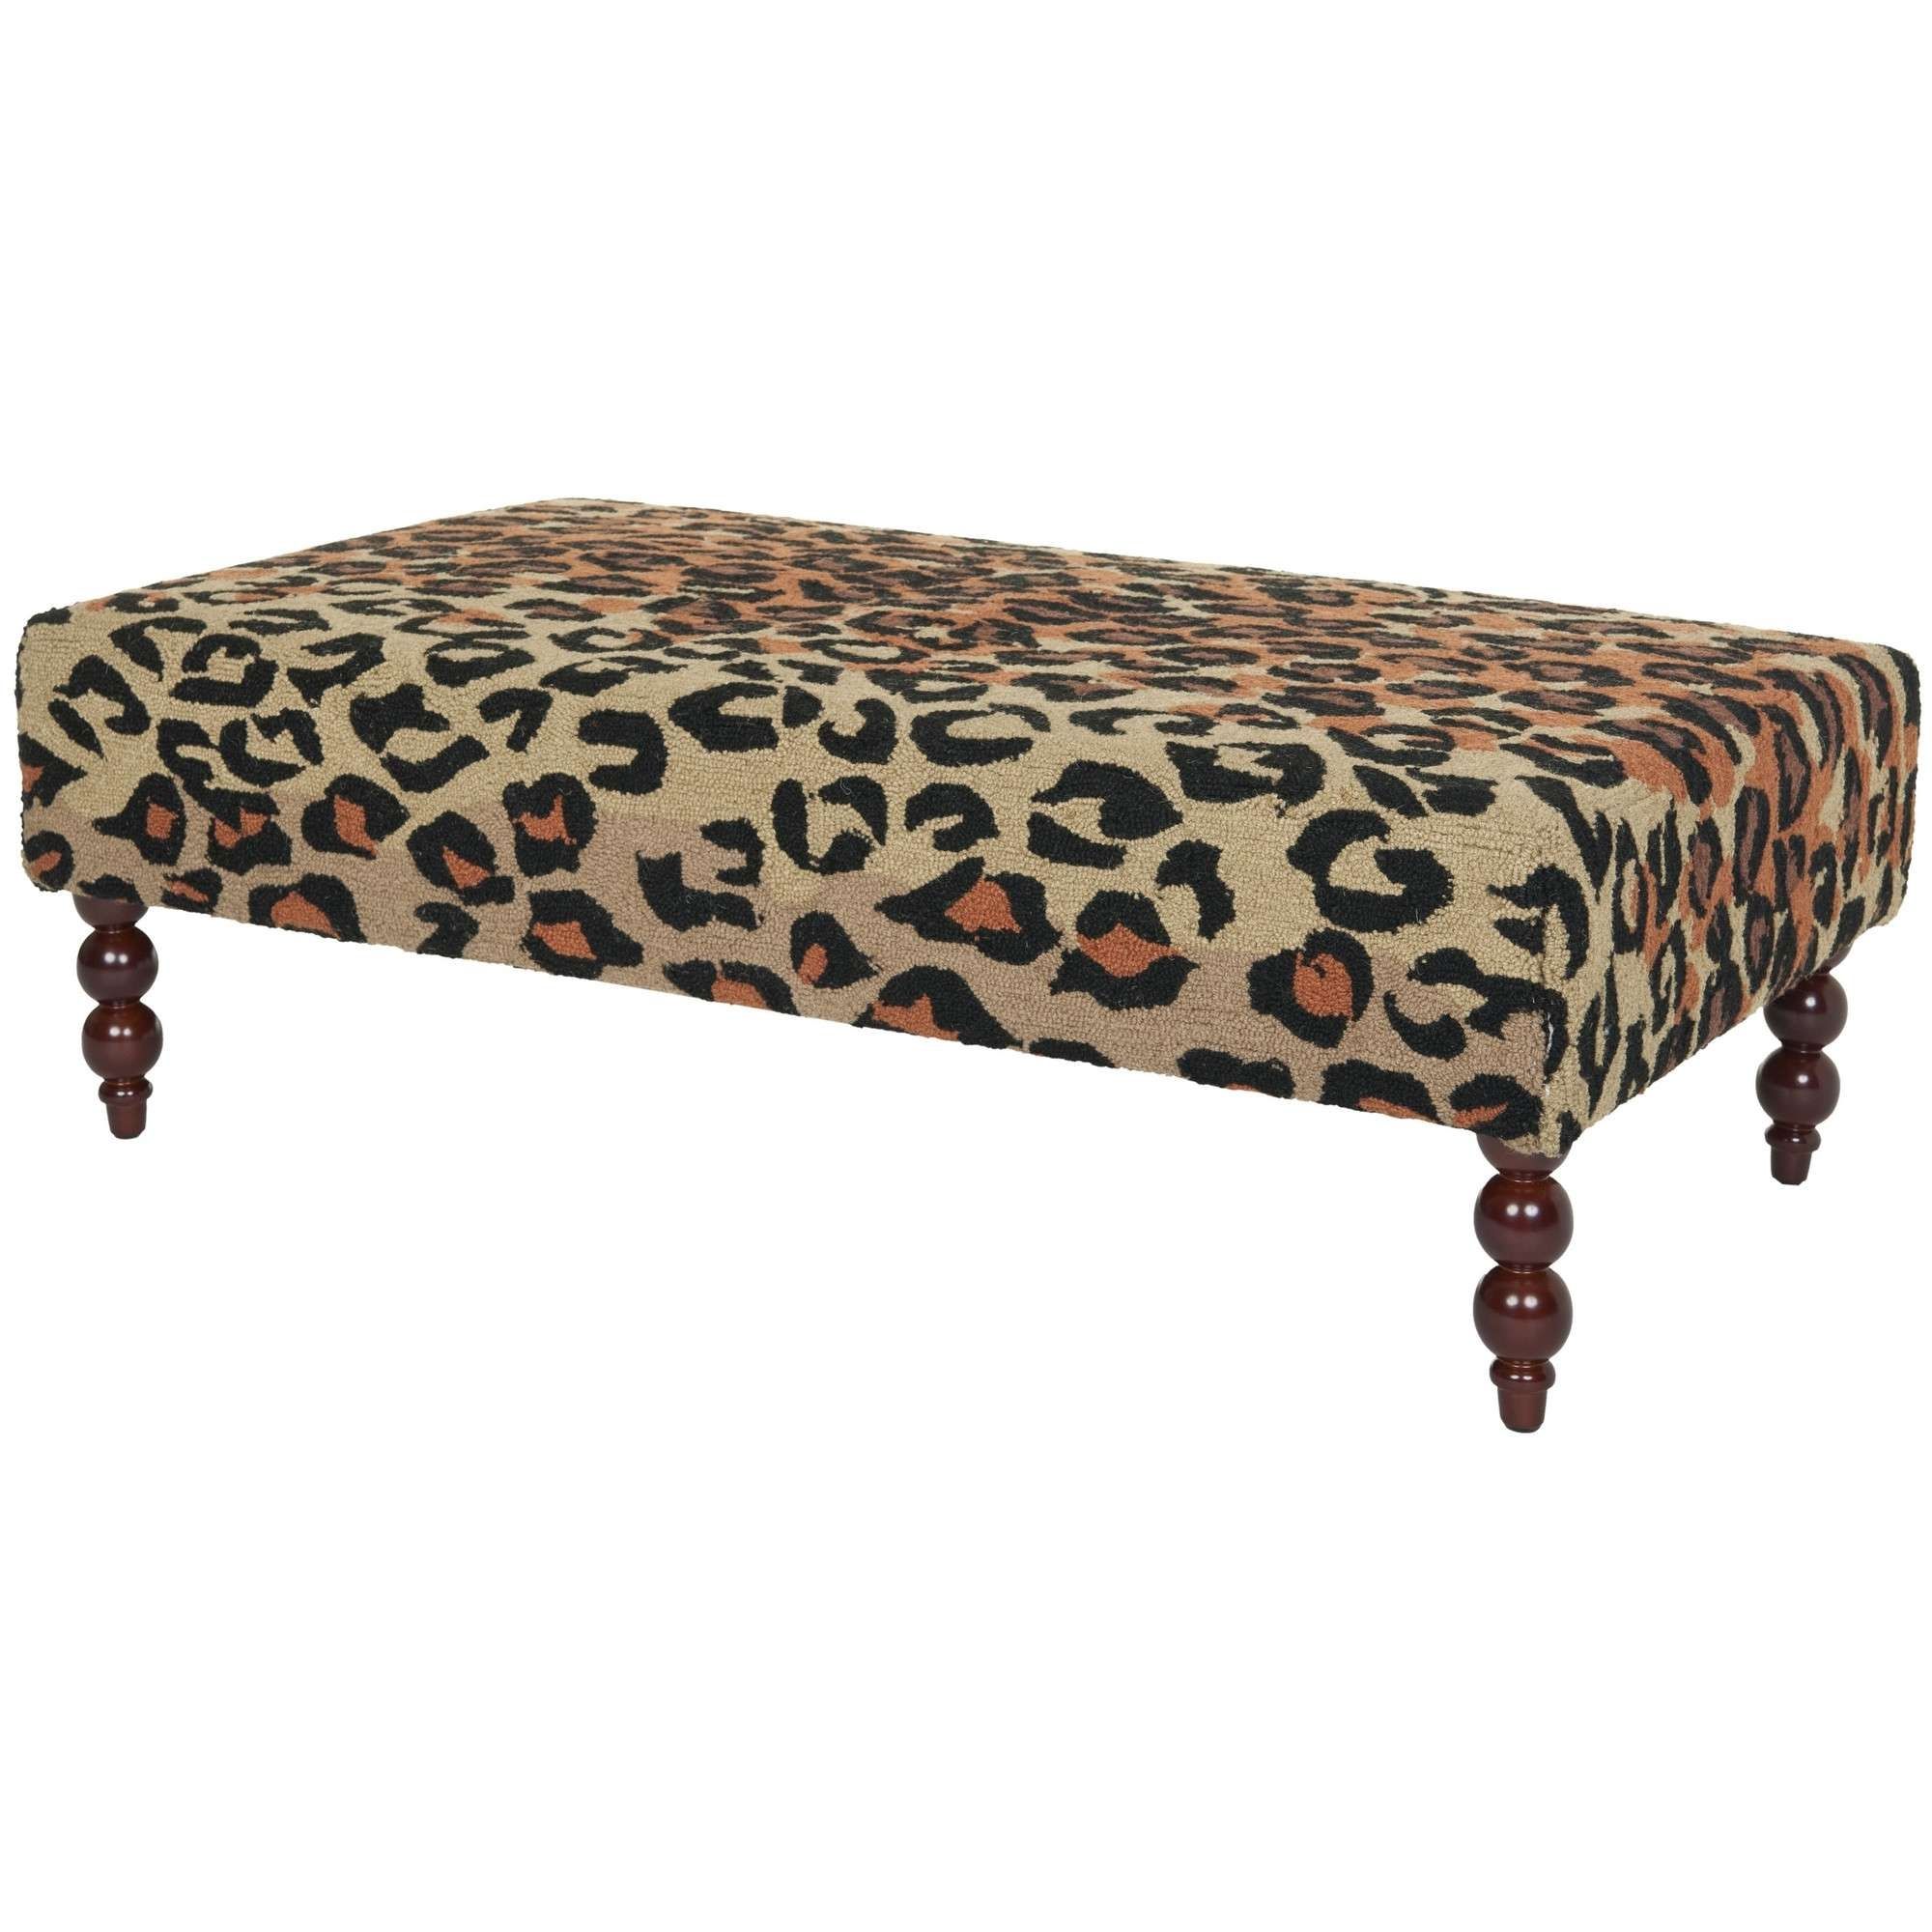 Fashionable Animal Print Ottoman Coffee Tables For Animal Print Ottoman Interior Design Wired Coffee Table Images (View 18 of 20)